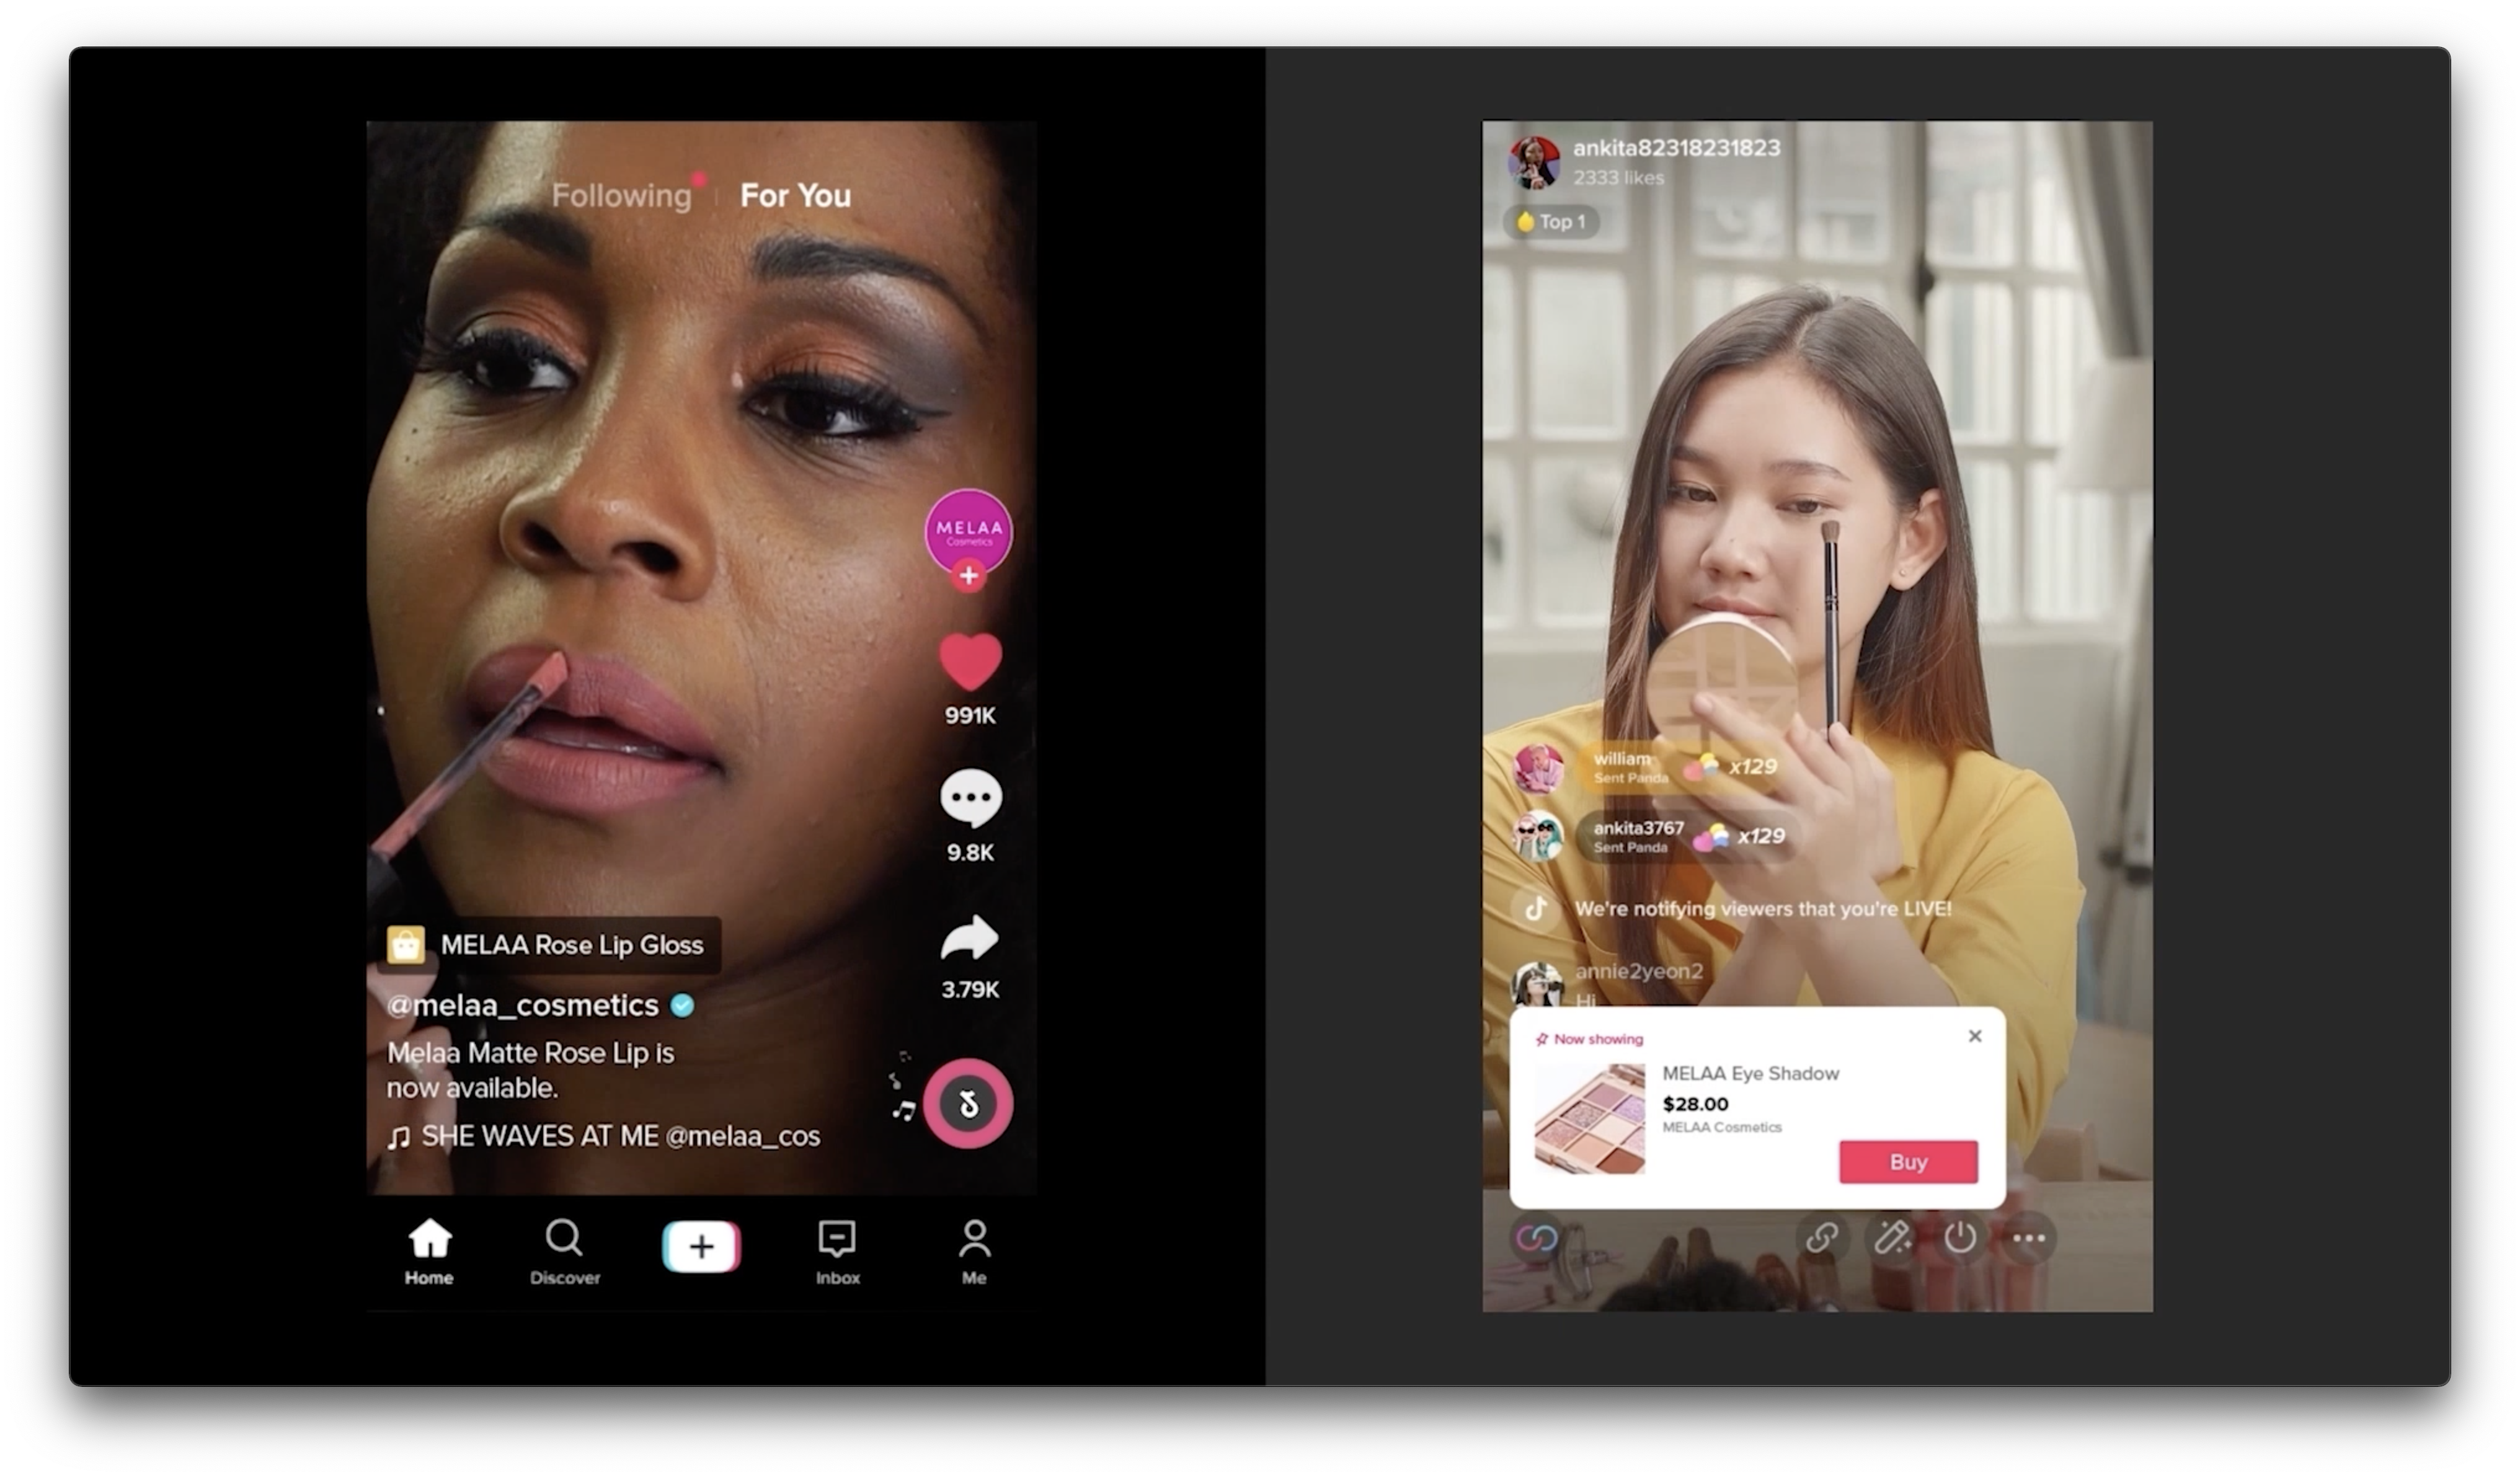 TikTok Shopping expands with more partnerships, LIVE Shopping, new ads and more | TechCrunch